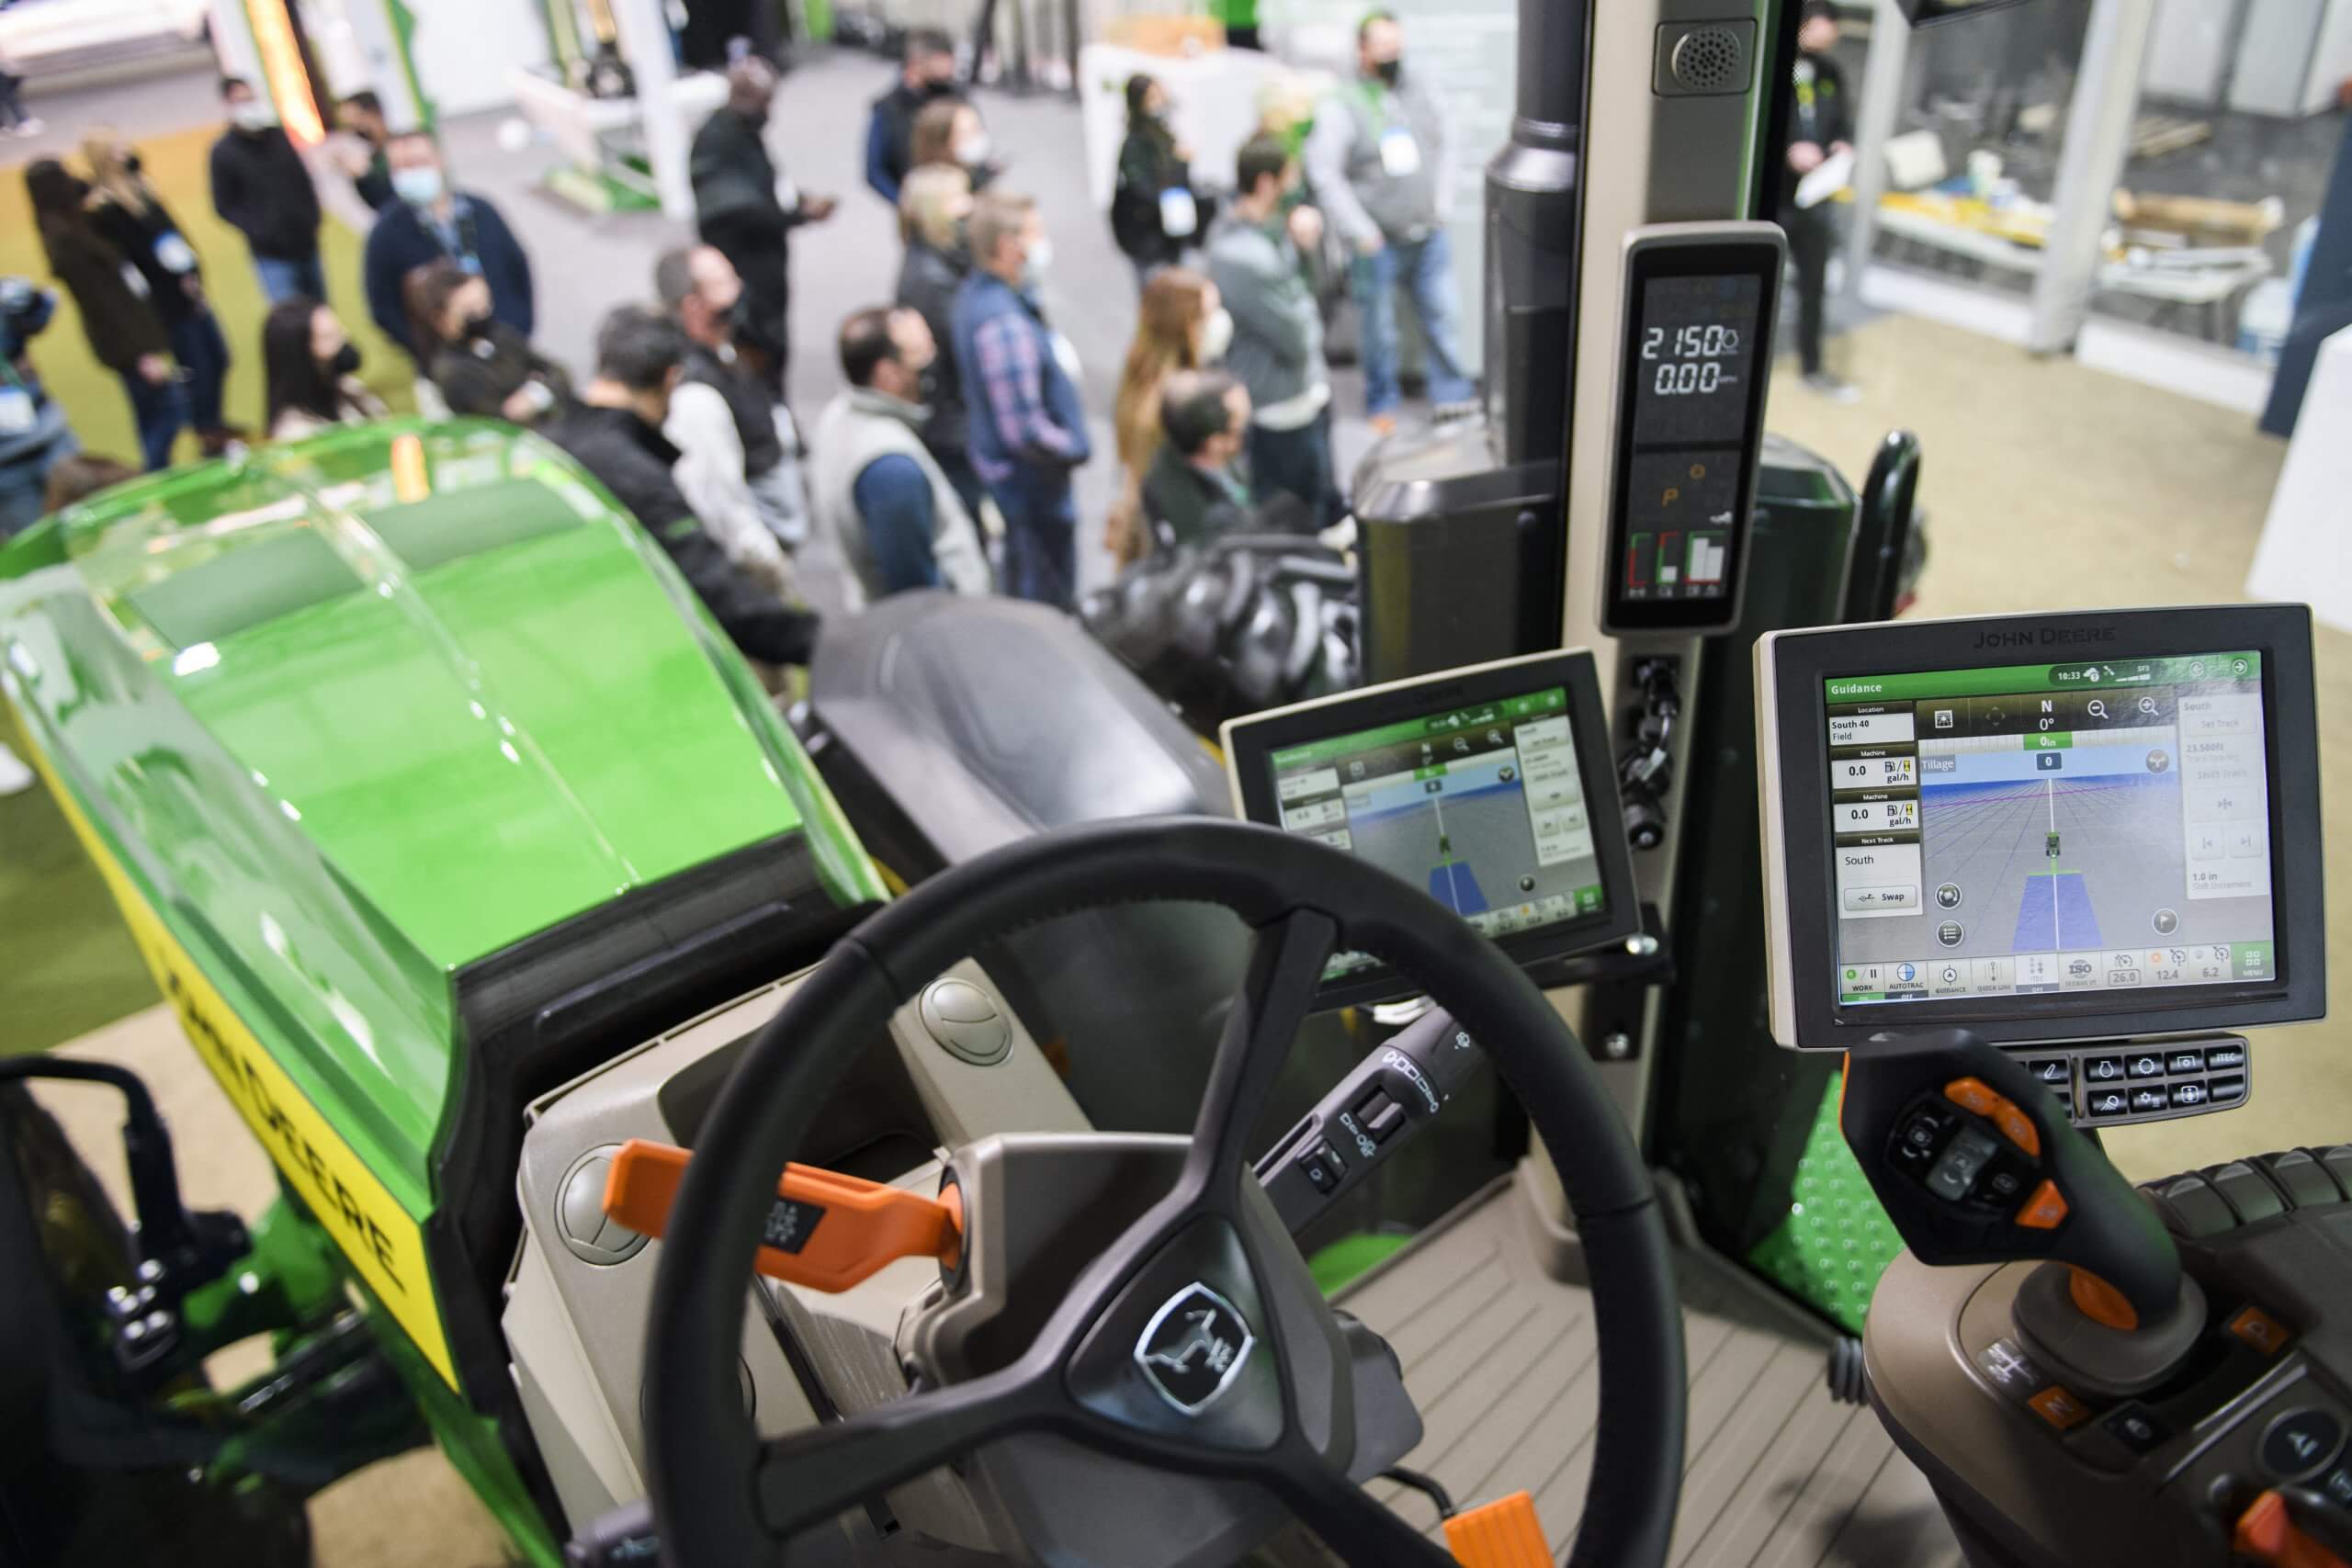 This is the first time that JohnDeere company will bring a robot tractor fully to market, after previous attempts to automate farming in the US failed to pay off.